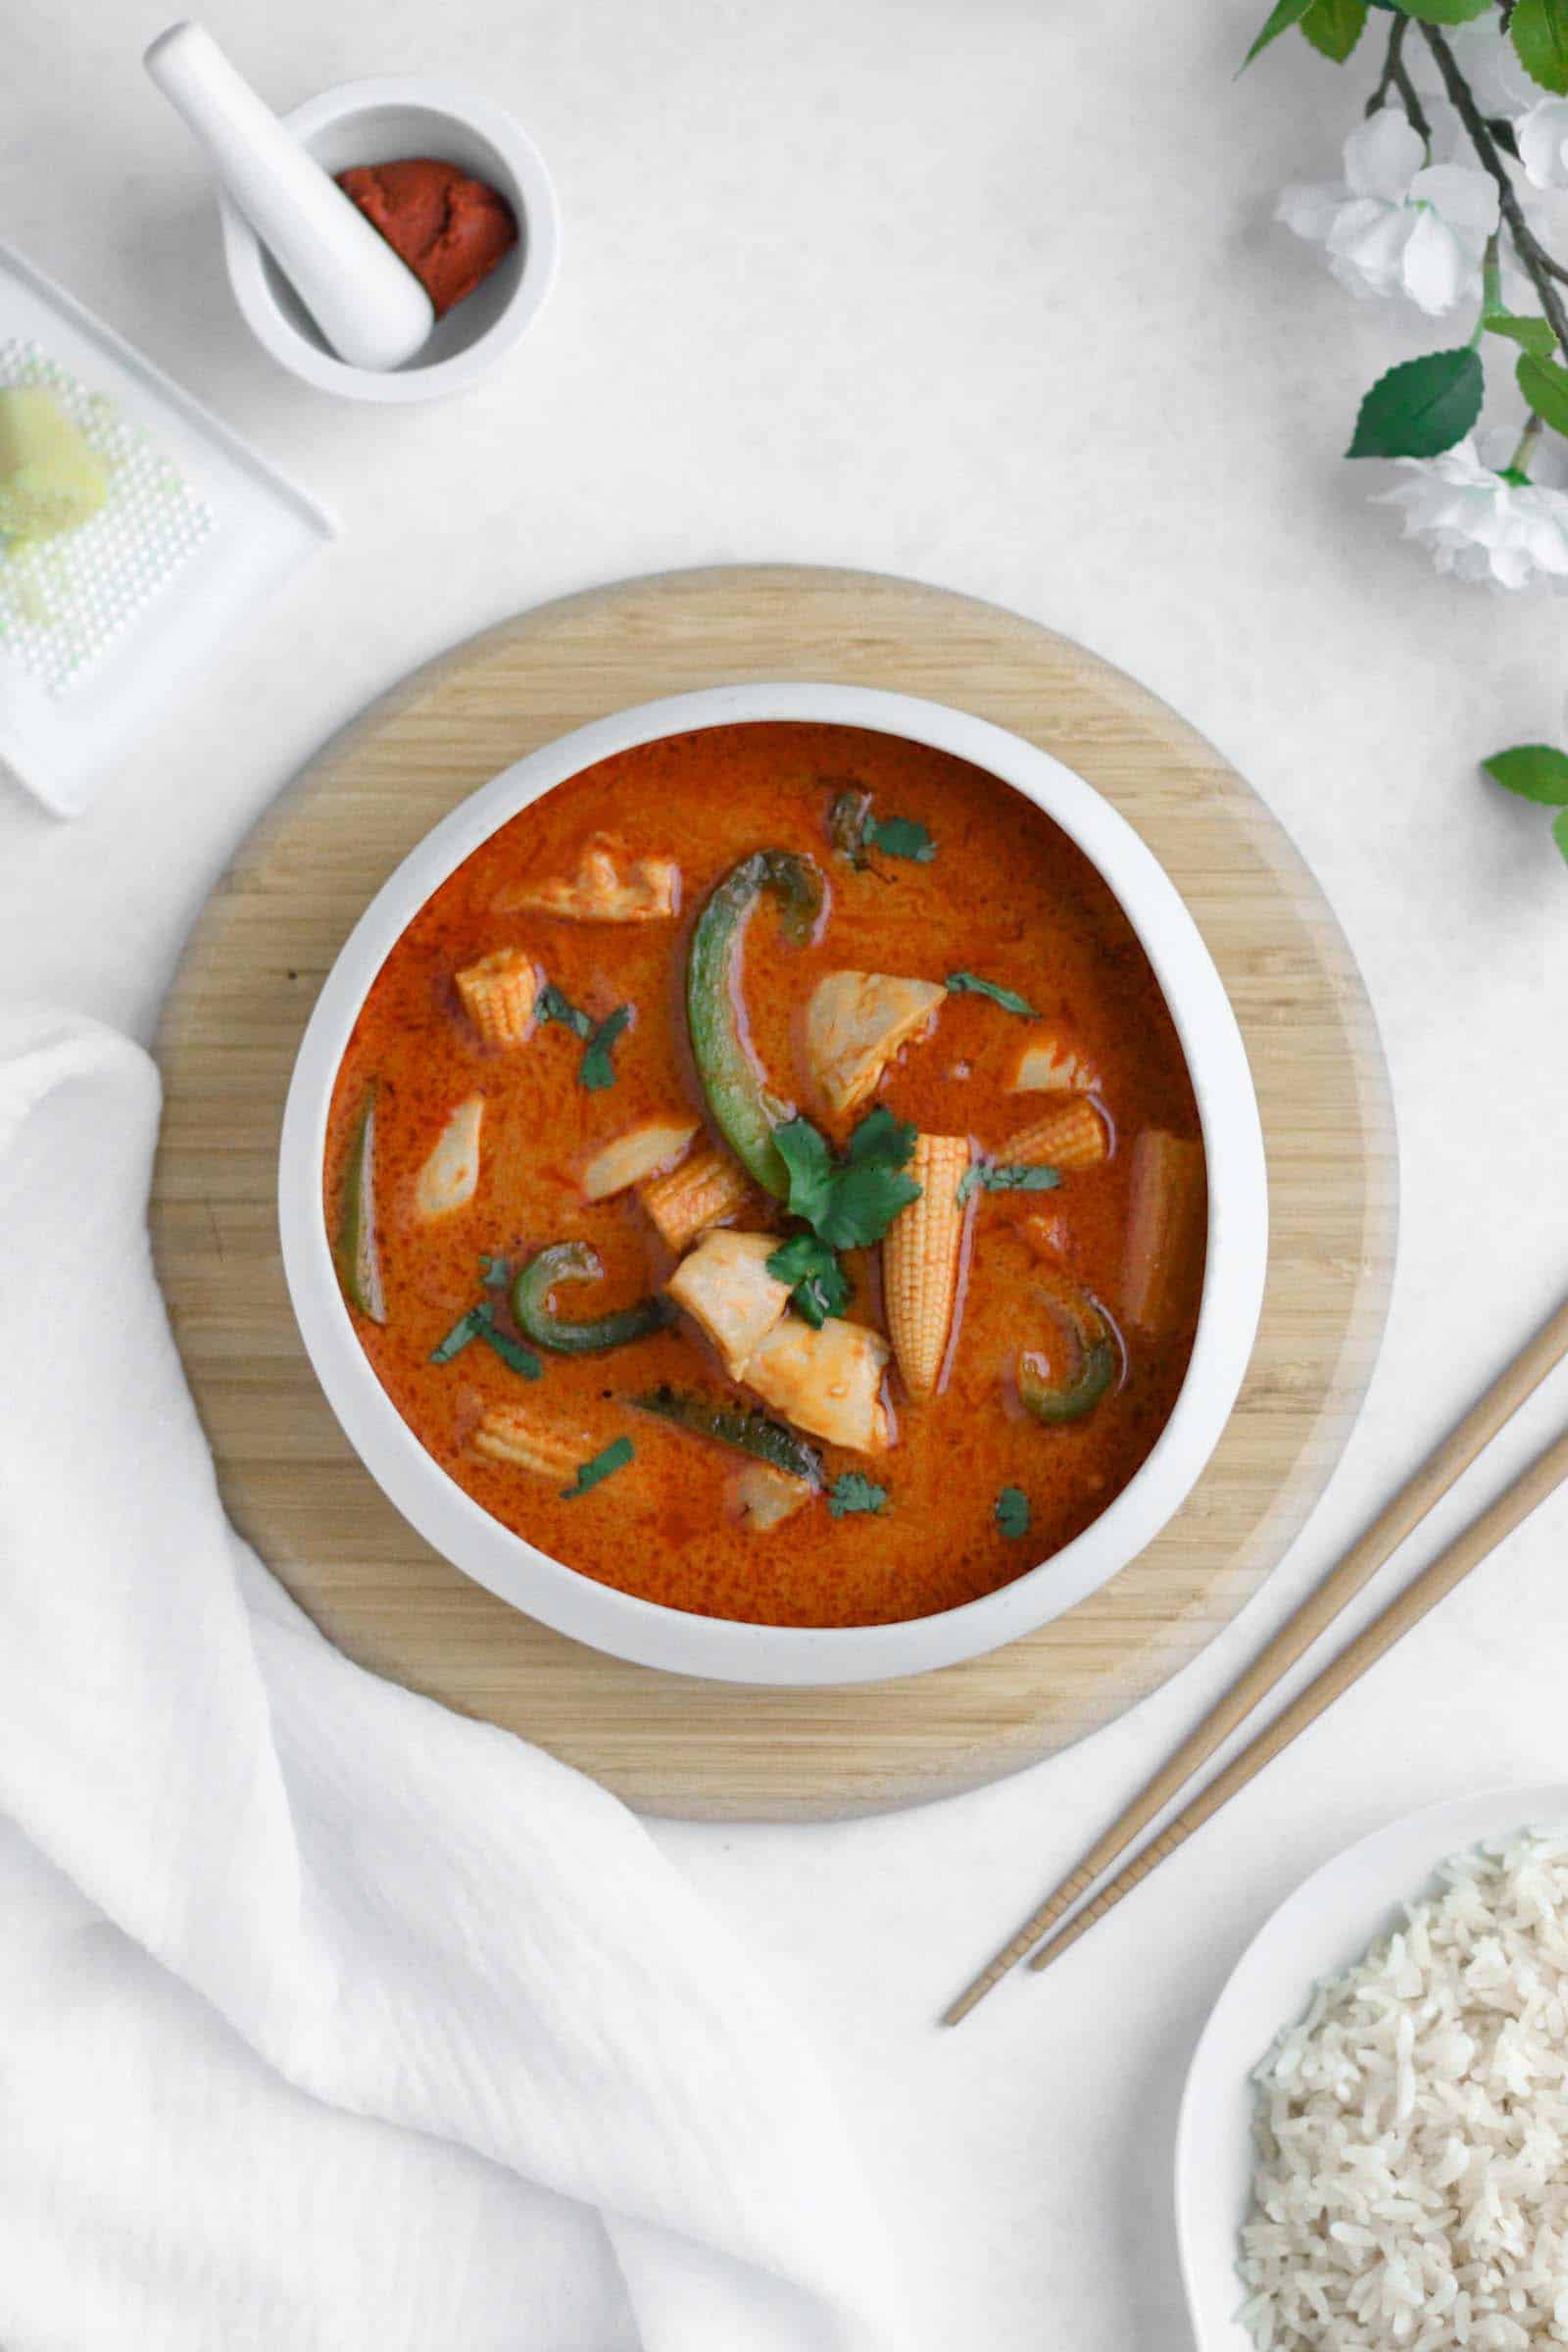 chicken Thai red curry gathers all the best flavours of Thailand. Some juicy chicken and crunchy vegetables simmer in a fragrant red curry and creamy coconut milk with a hint of ginger and lemongrass